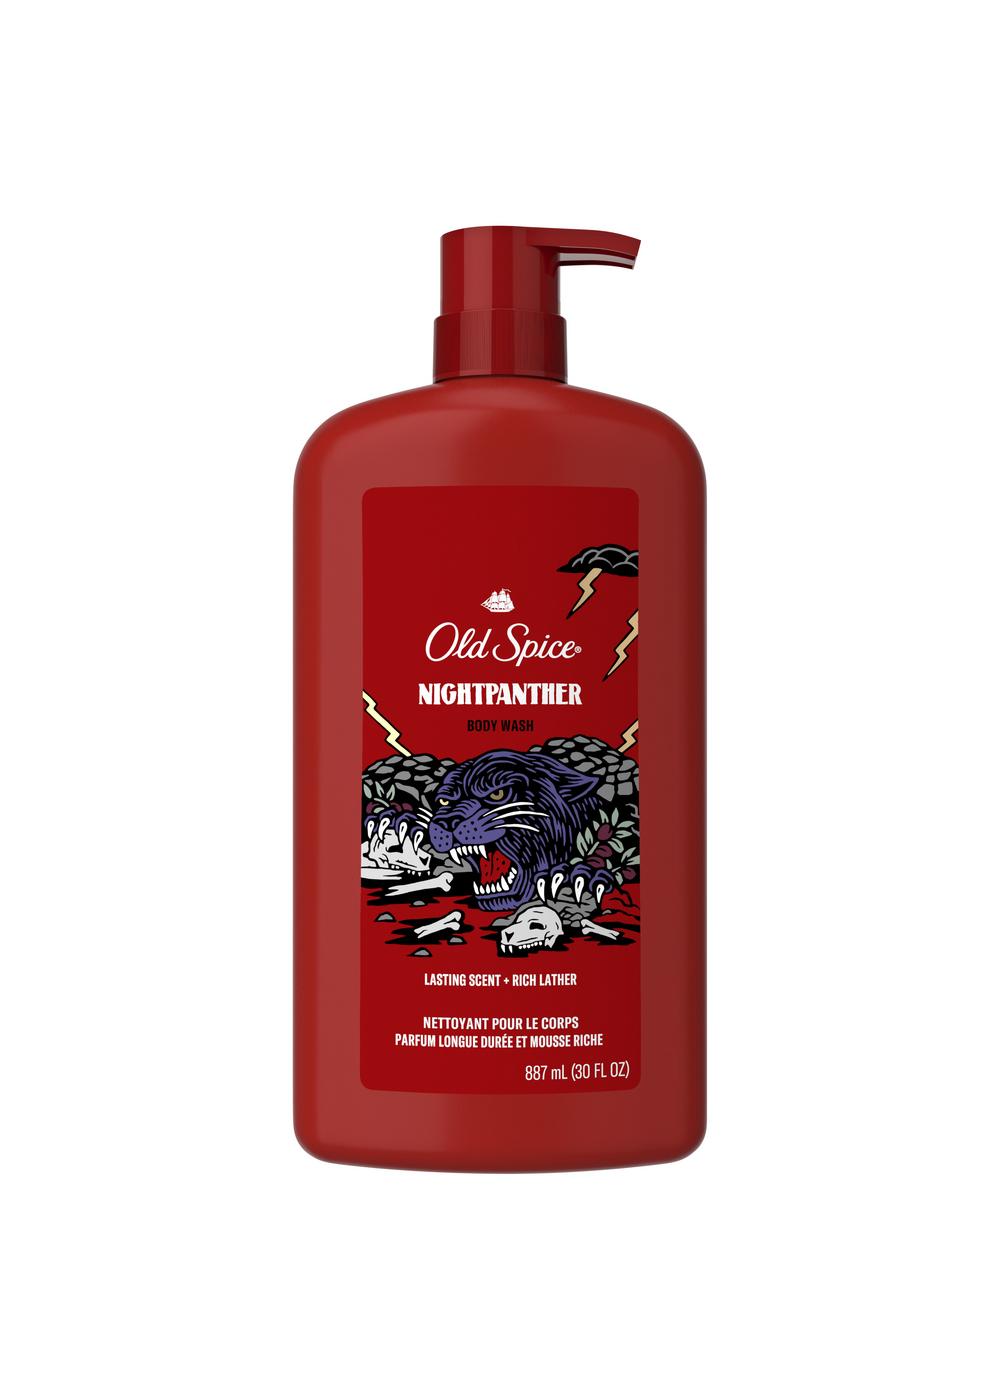 Old Spice Night Panther Body Wash; image 1 of 2